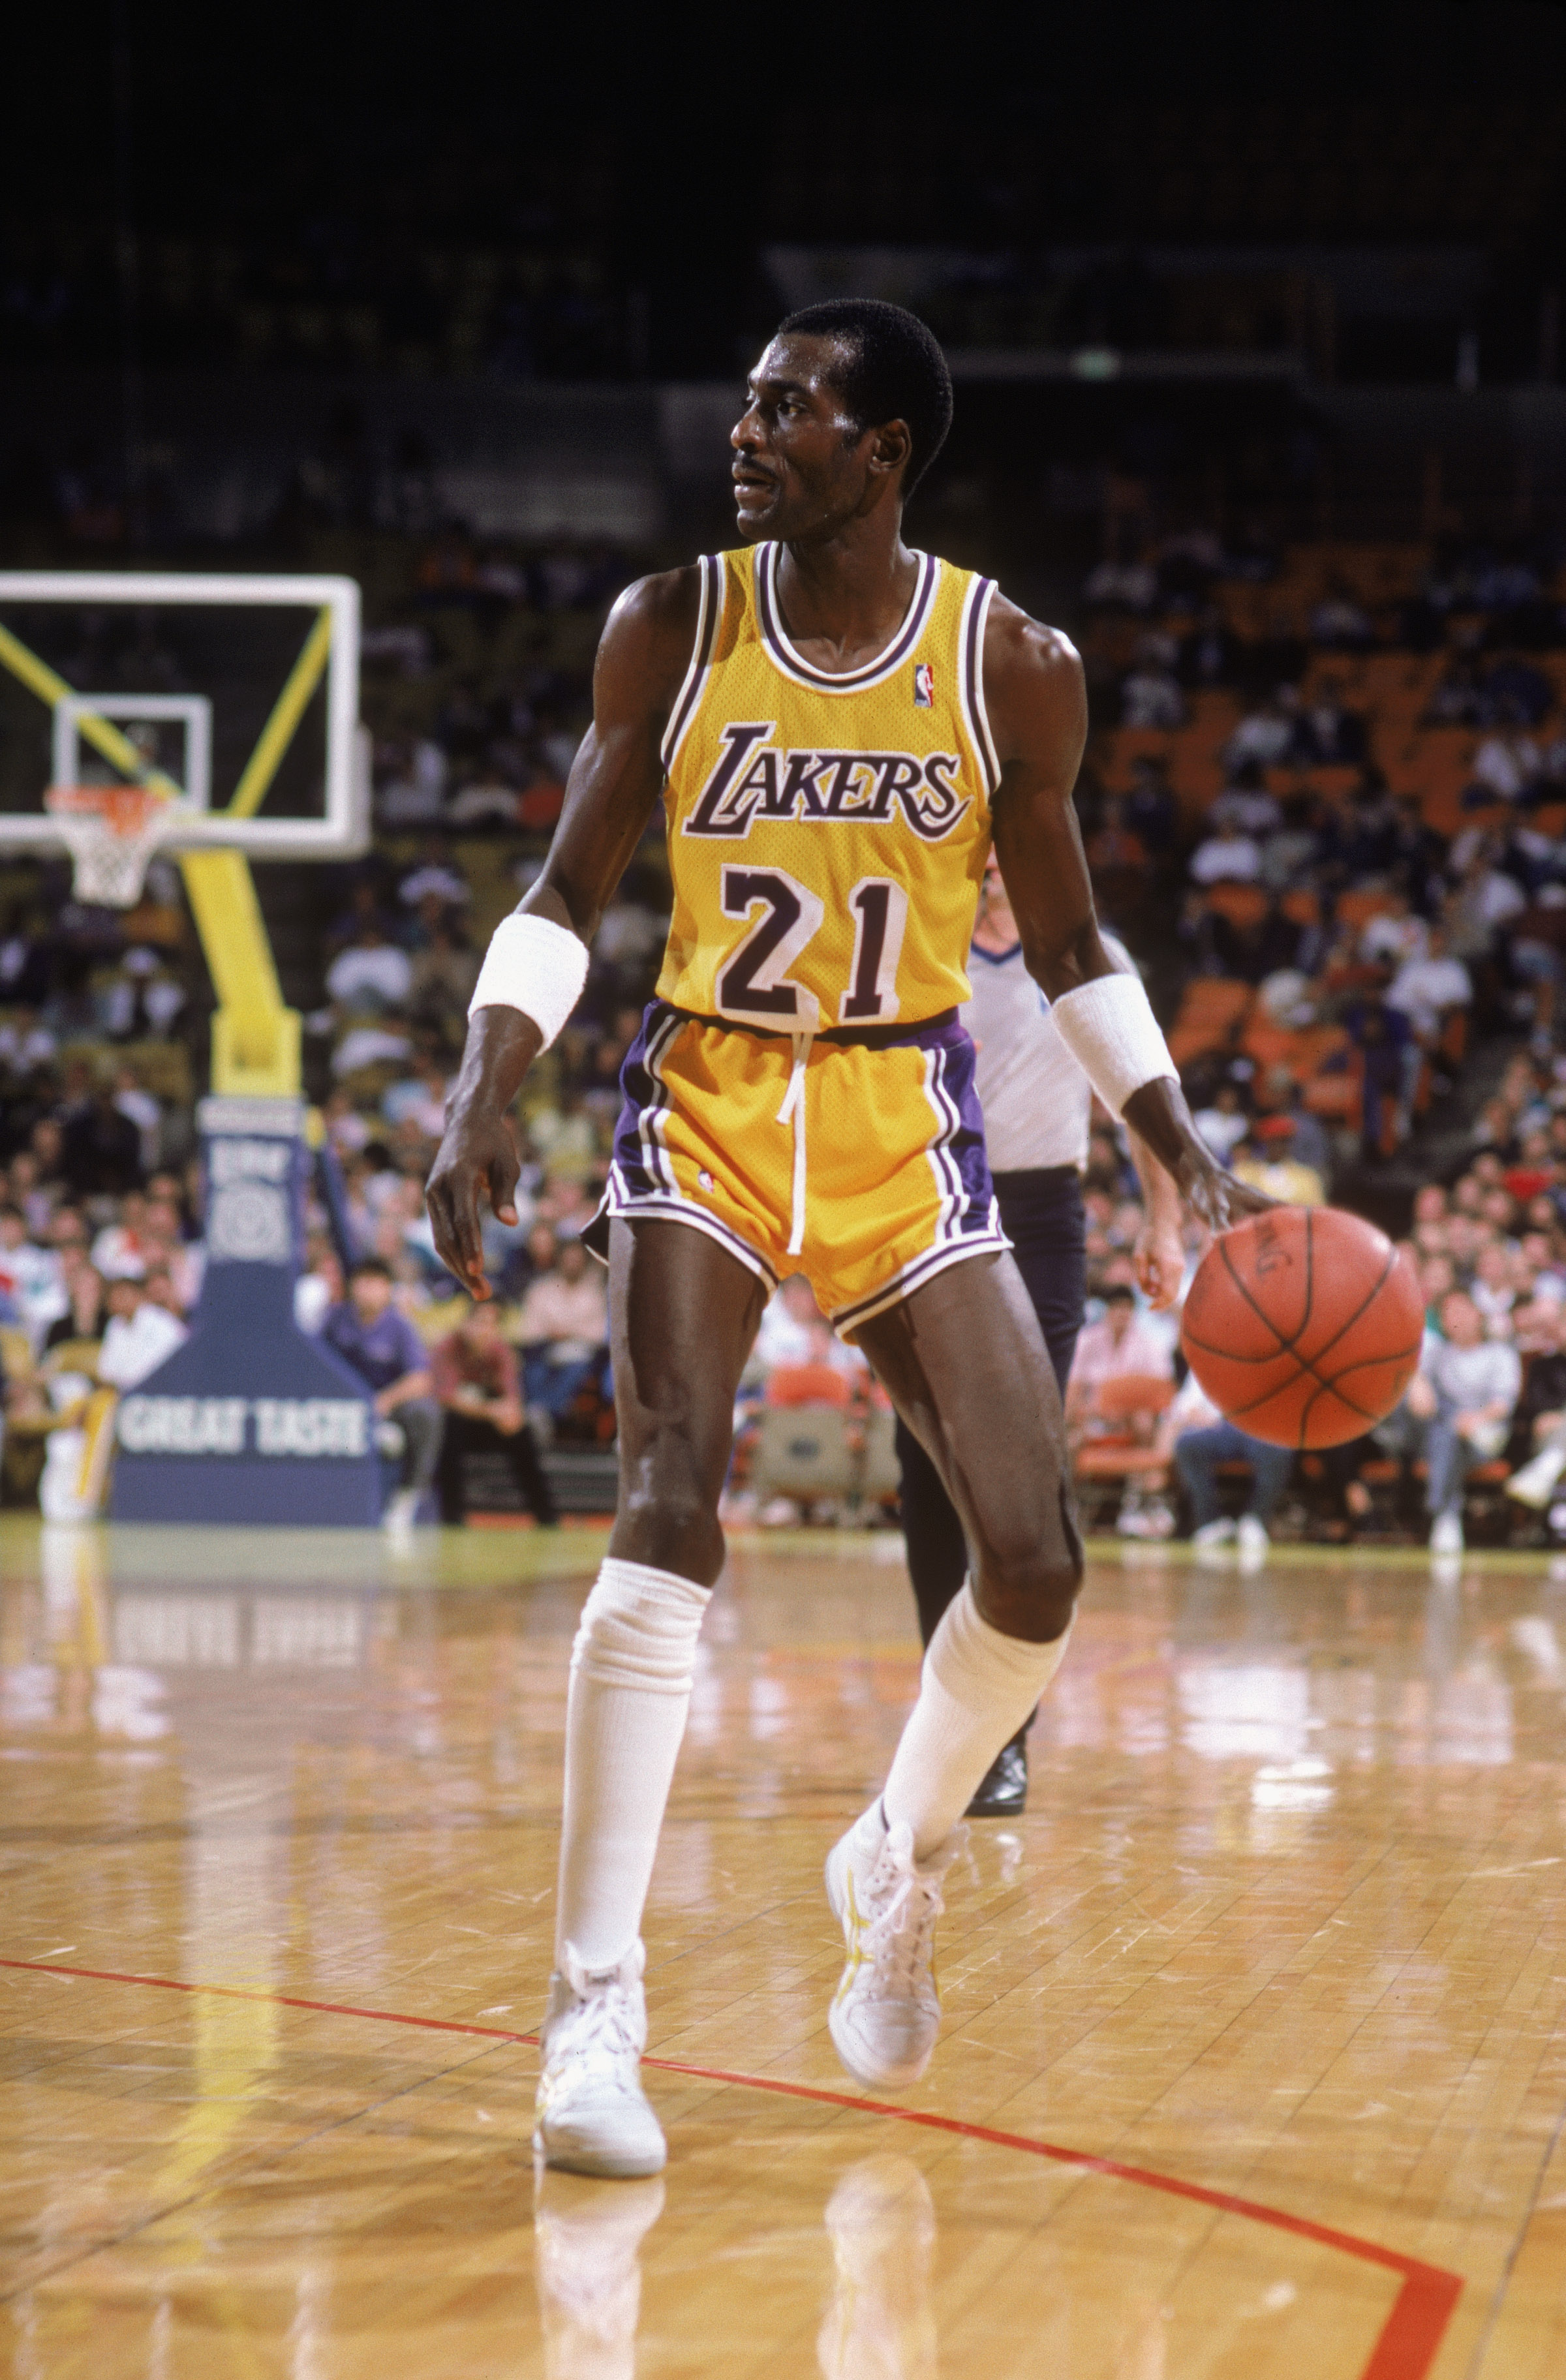 LOS ANGELES - 1987:  Michael Cooper #21 of the Los Angeles Lakers dribbles the ball during an NBA game at the Great Western Forum in Los Angeles, California in 1987. (Photo by: Rick Stewart/Getty Images)